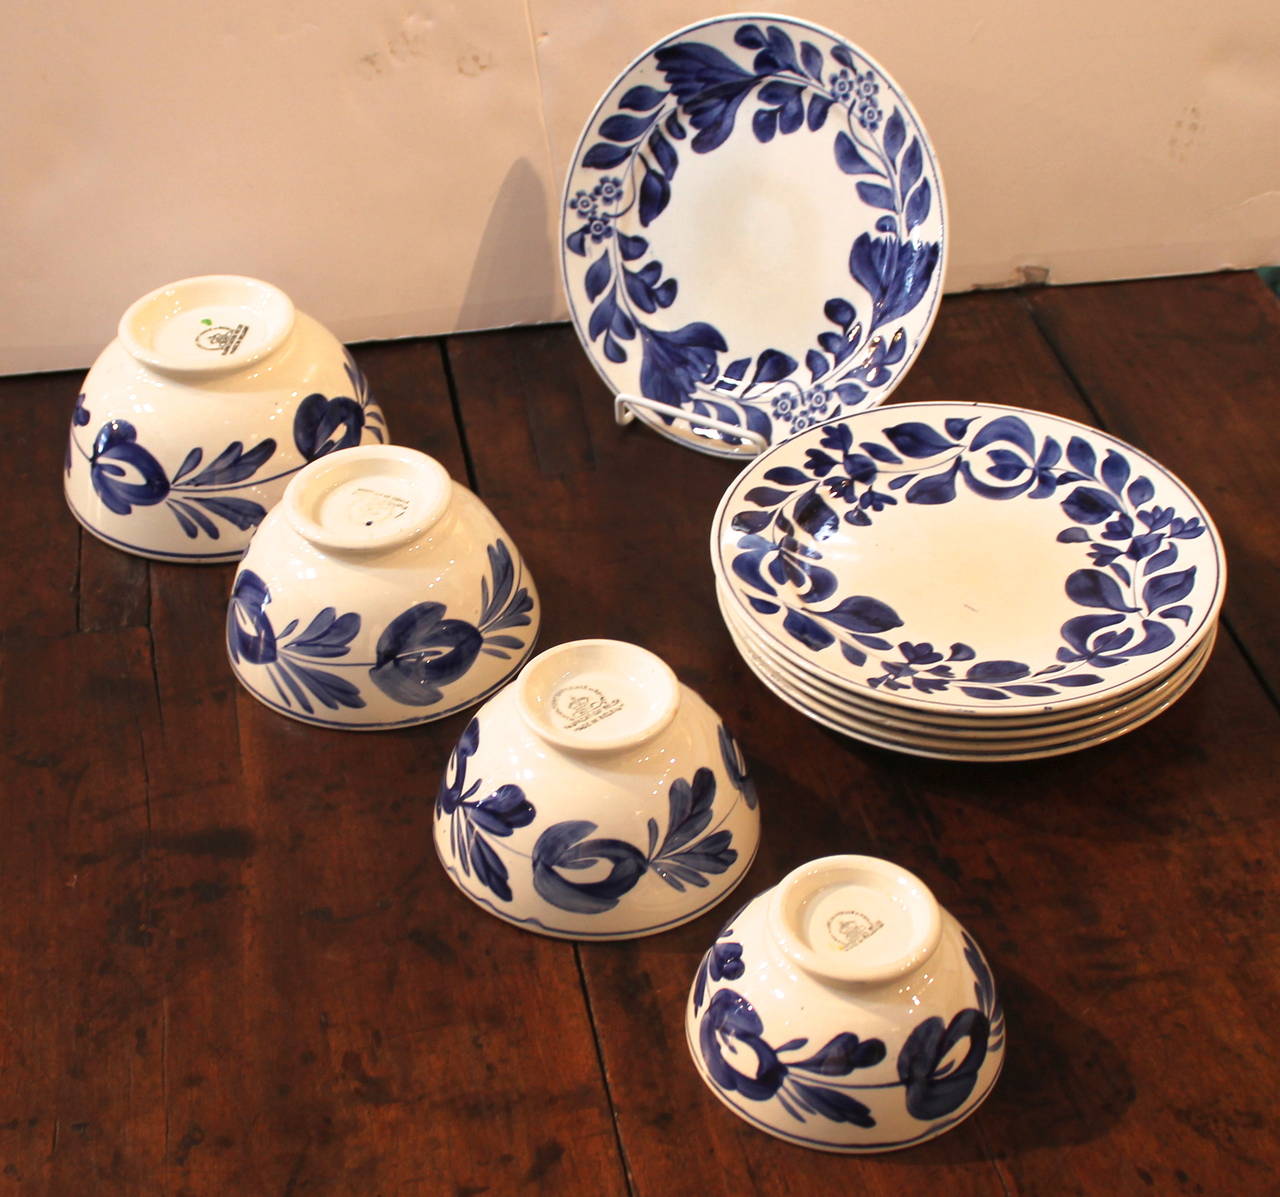 This is really a wonderful starter set of blue and white stick spatter in the English pattern of Adams Rose. All pieces are in mint condition. There are six plates and a nest of four bowls. The plates measure 9